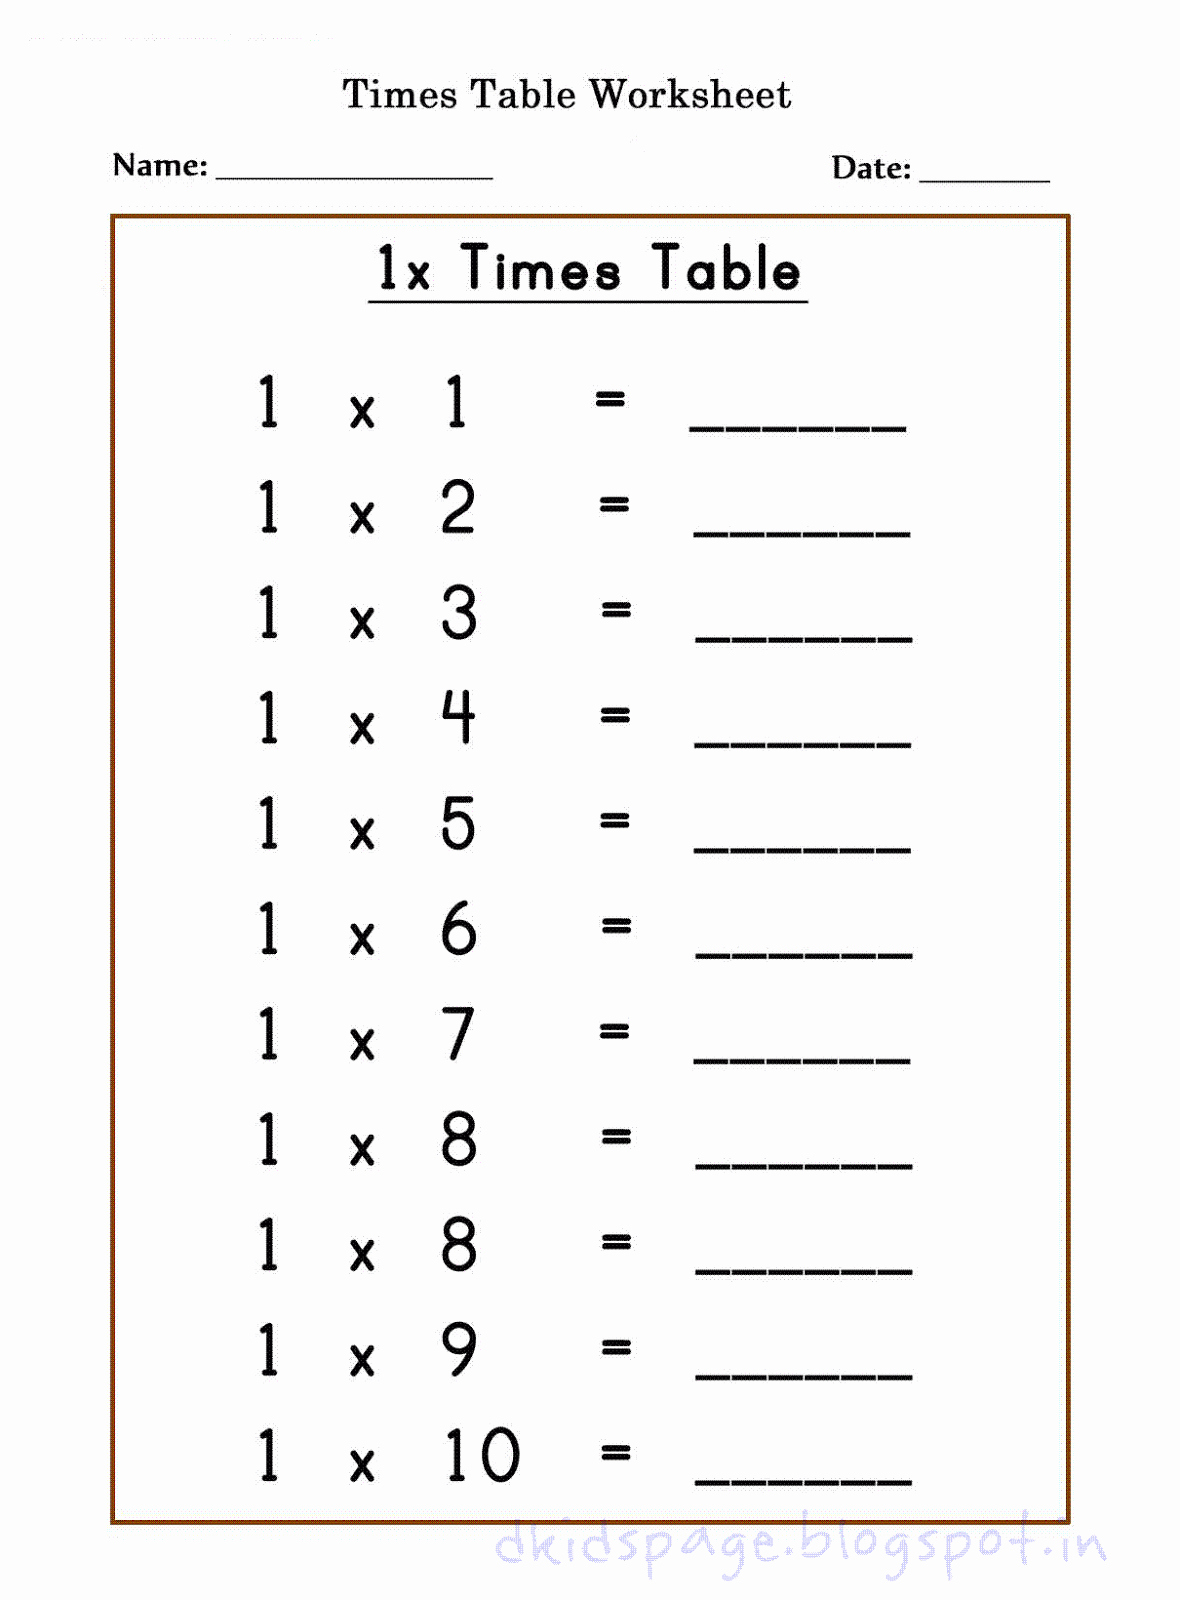 Multiplication Table Worksheet Fresh Kids Page Printable 1 X Times Table Worksheets for Free